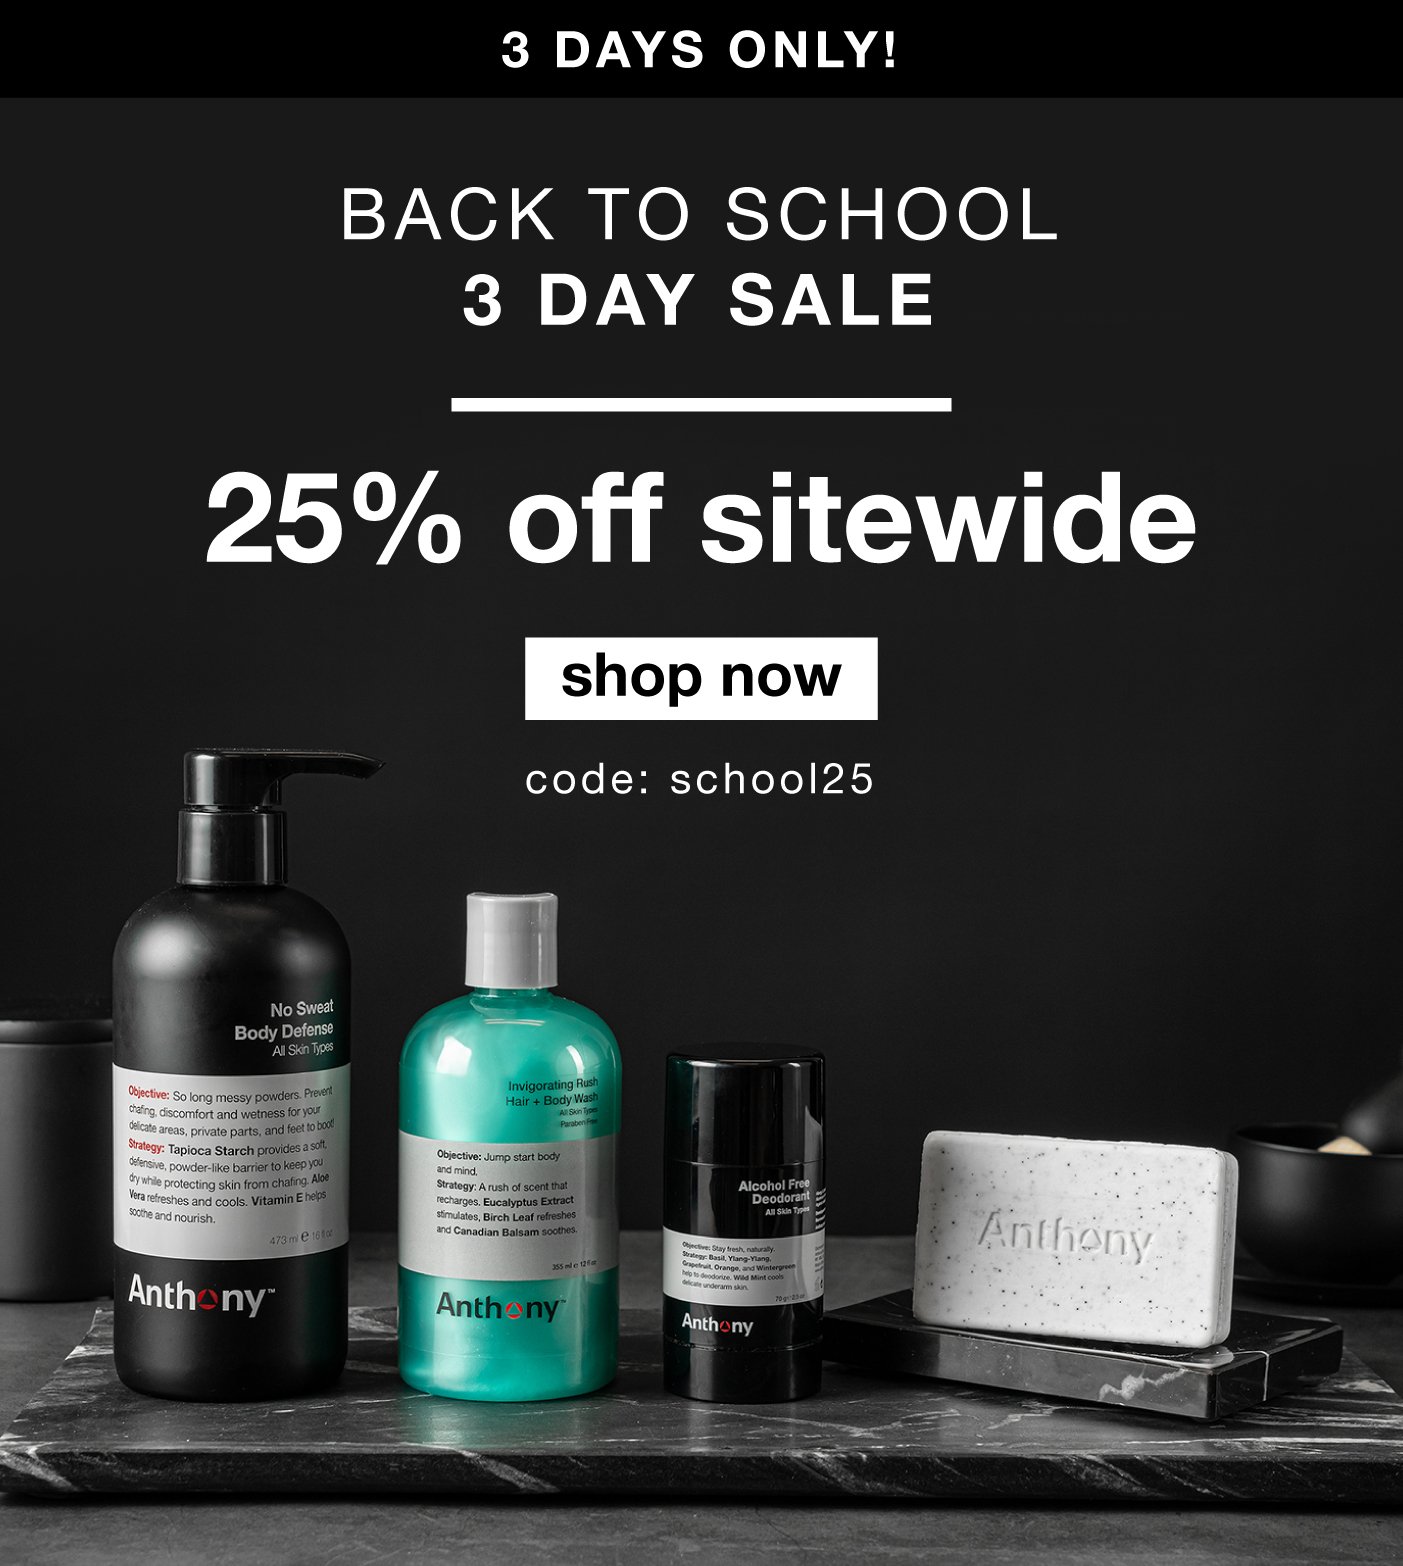 3 days only! Back to school sale - 25% off sitewide use code: SCHOOL25